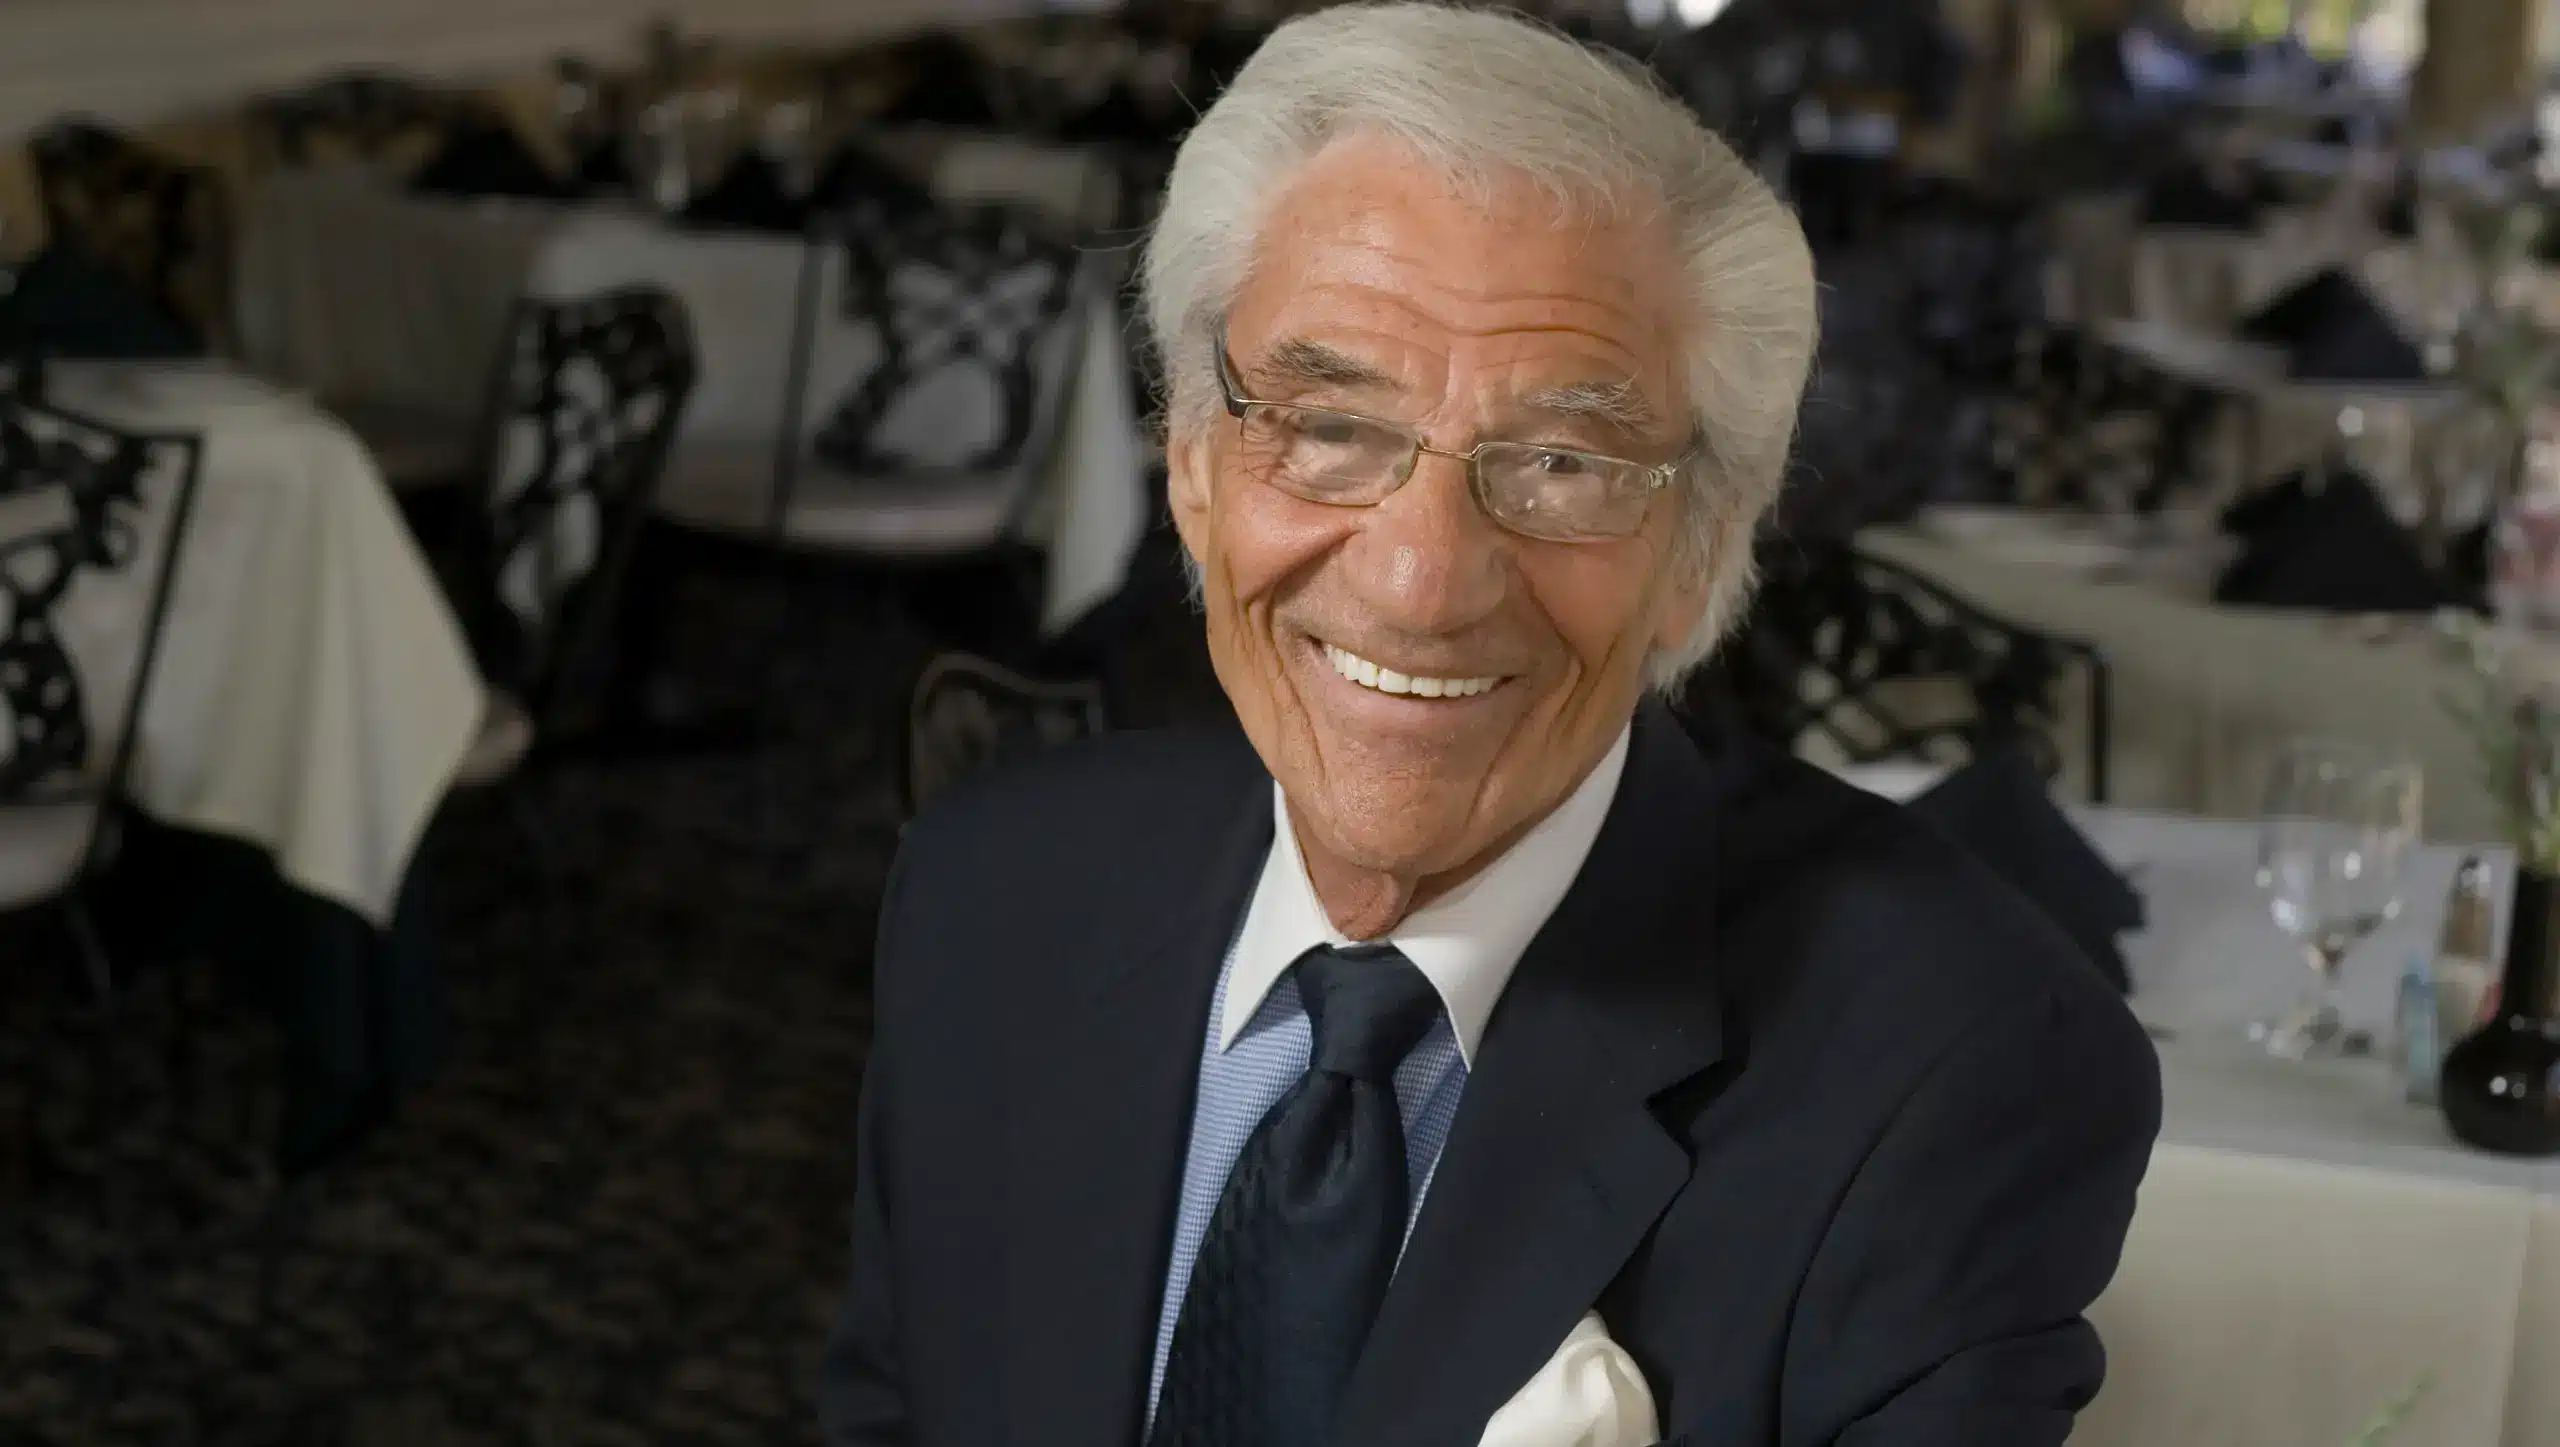 An elderly man with white hair and glasses smiling at the camera, wearing a dark suit and tie, at an event with tables set in the background.